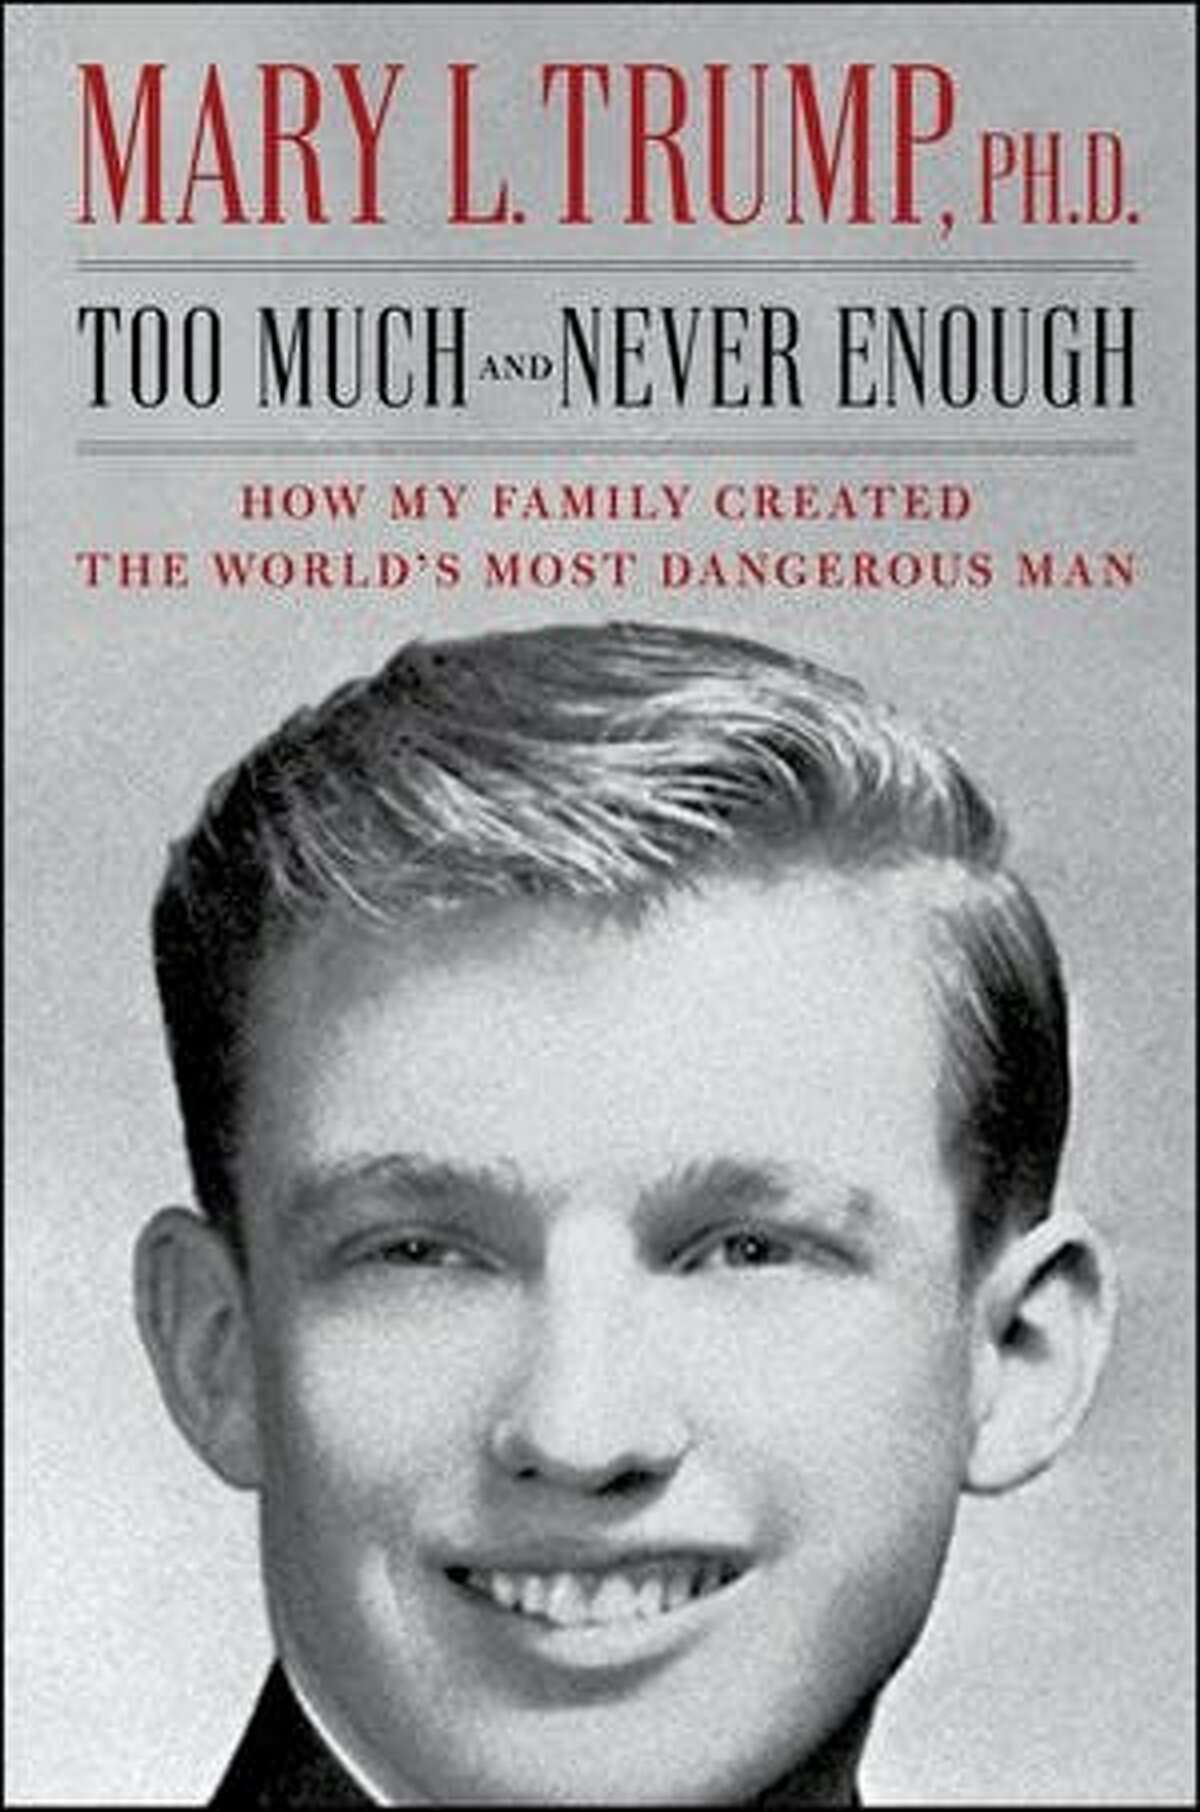 Mary Trump's "Too Much and Never Enough: How My Family Created the World’s Most Dangerous Man"